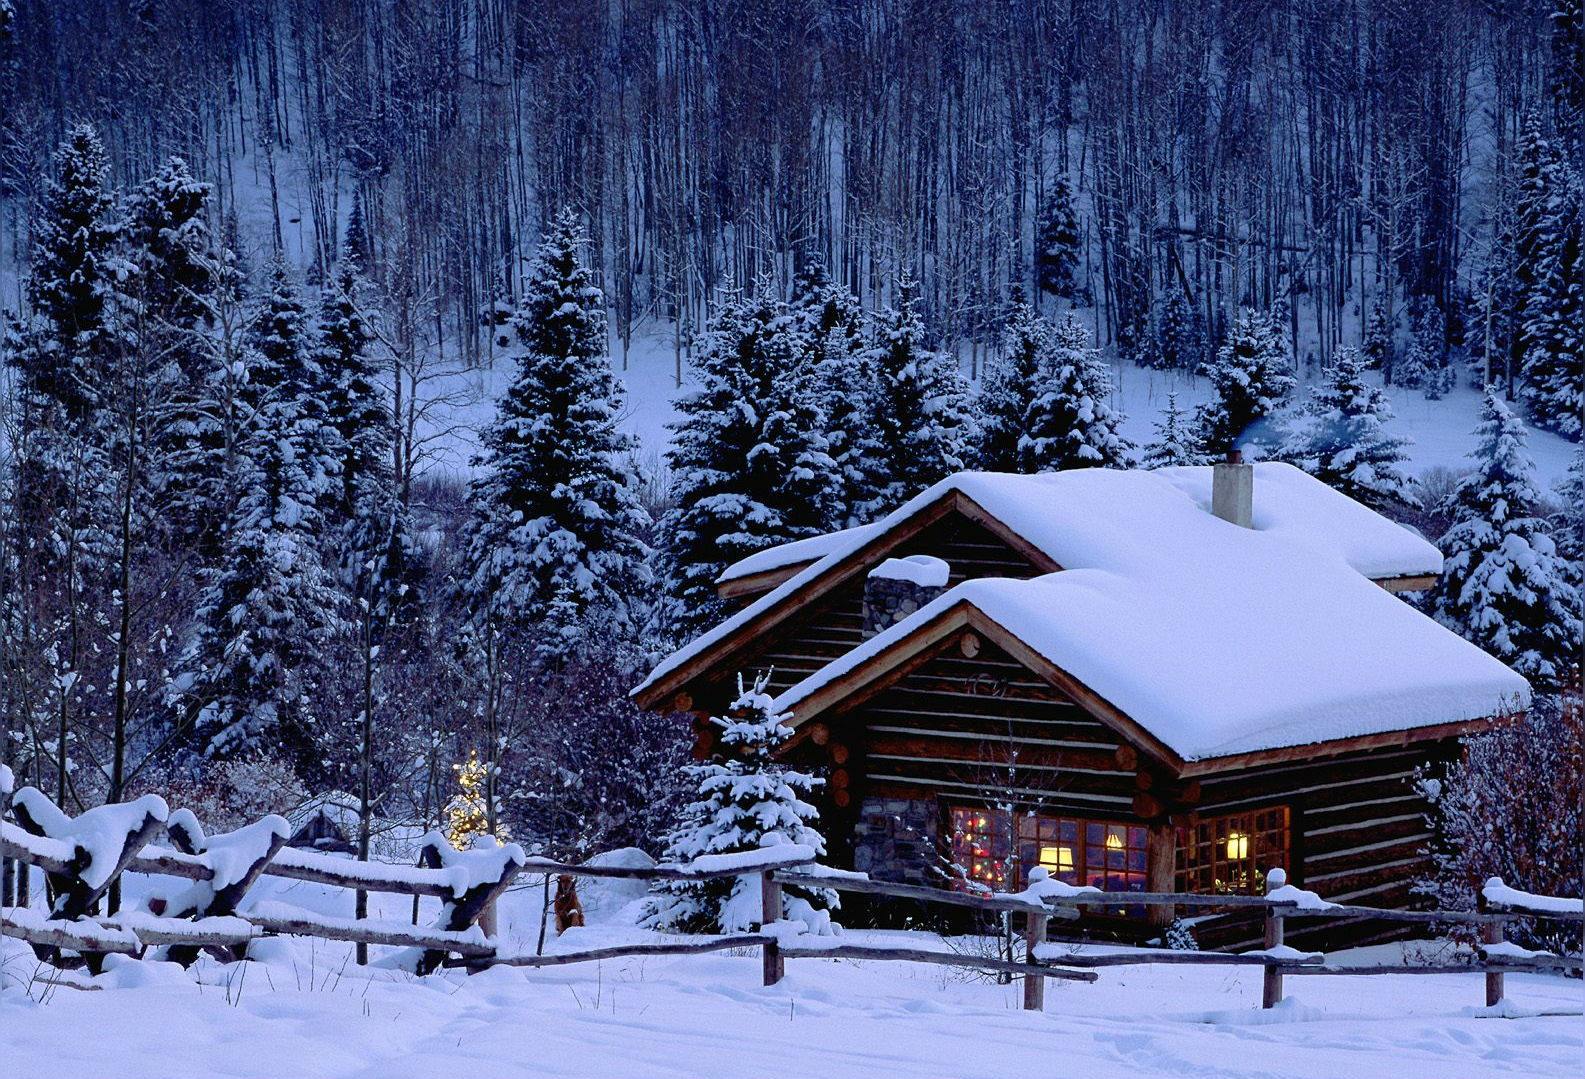 ... kashmir winter wallpaper which is under the winter wallpapers category